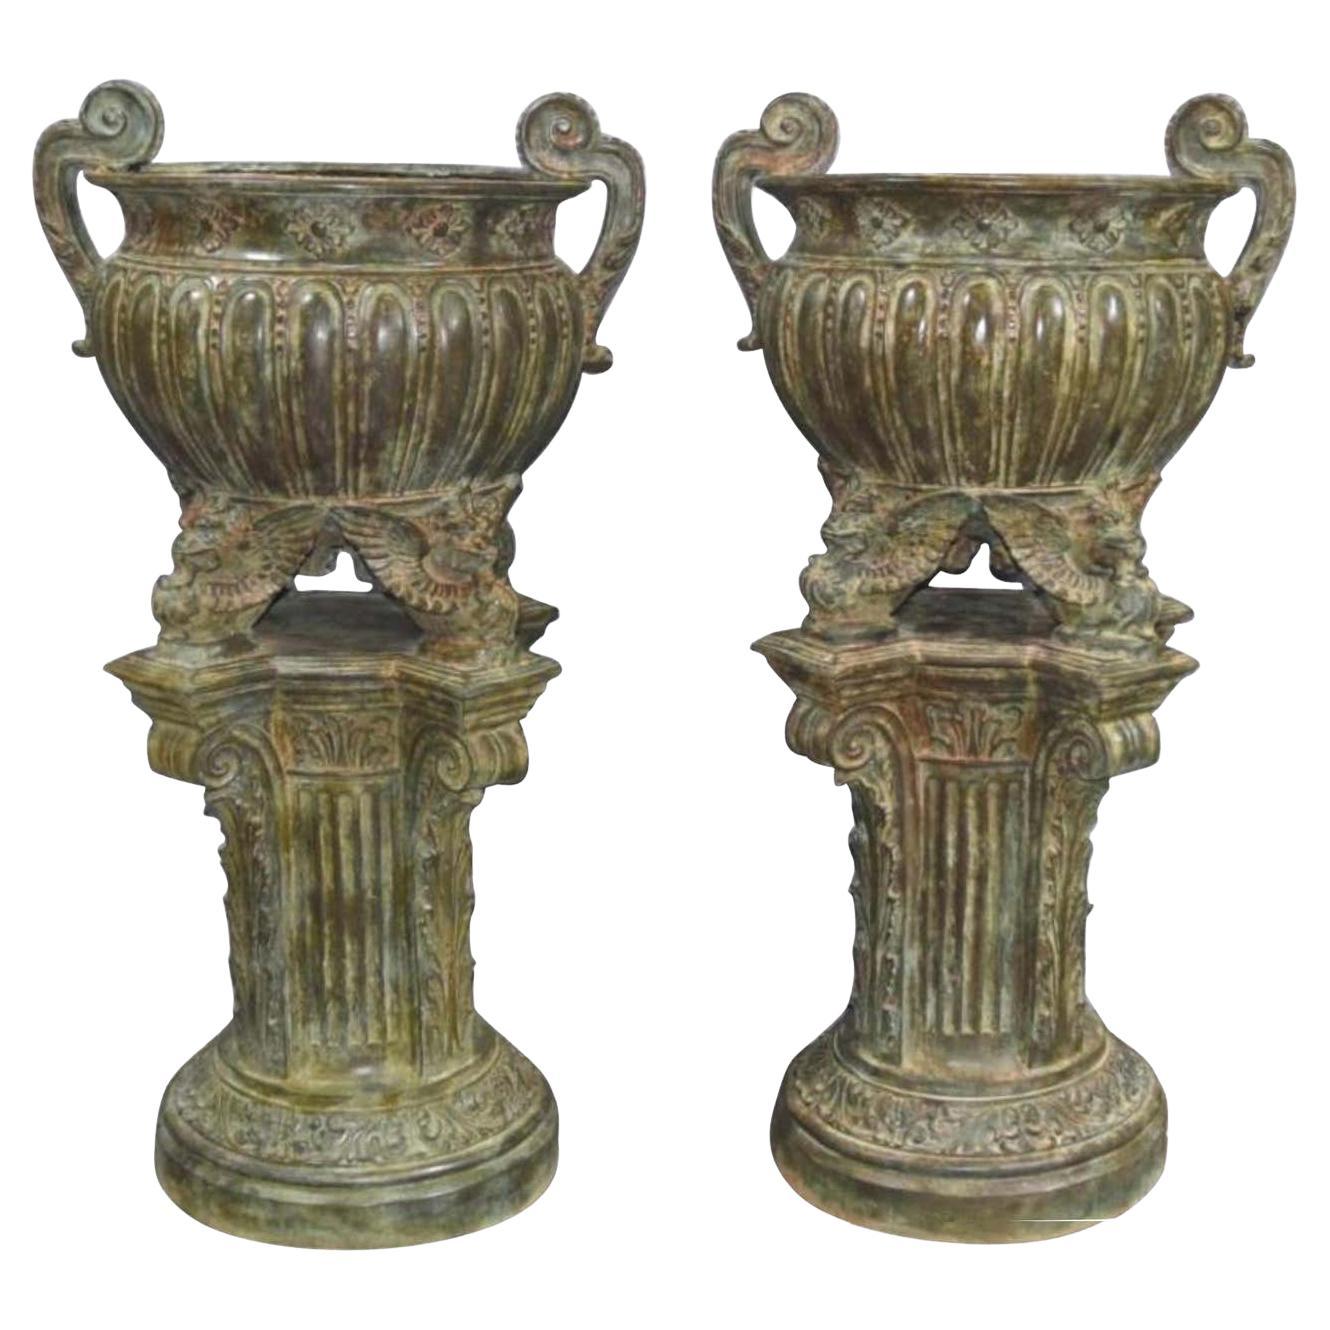 Pair of Bronze Garden Urns, French Architectural Empire Vases, 20th Century For Sale